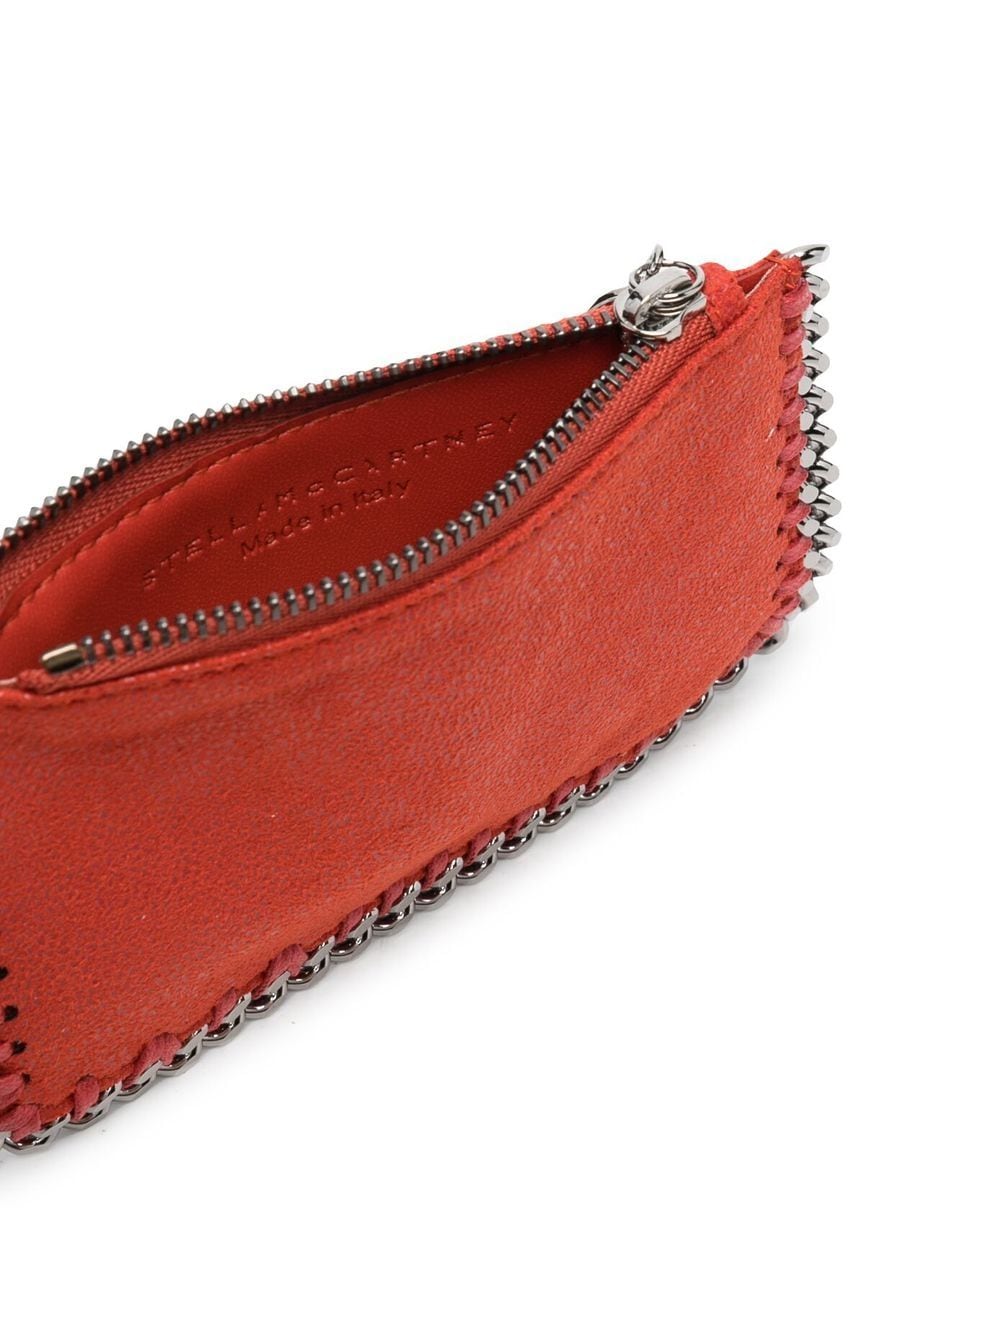 Falabella Zipped Cardholder - More Colors Available